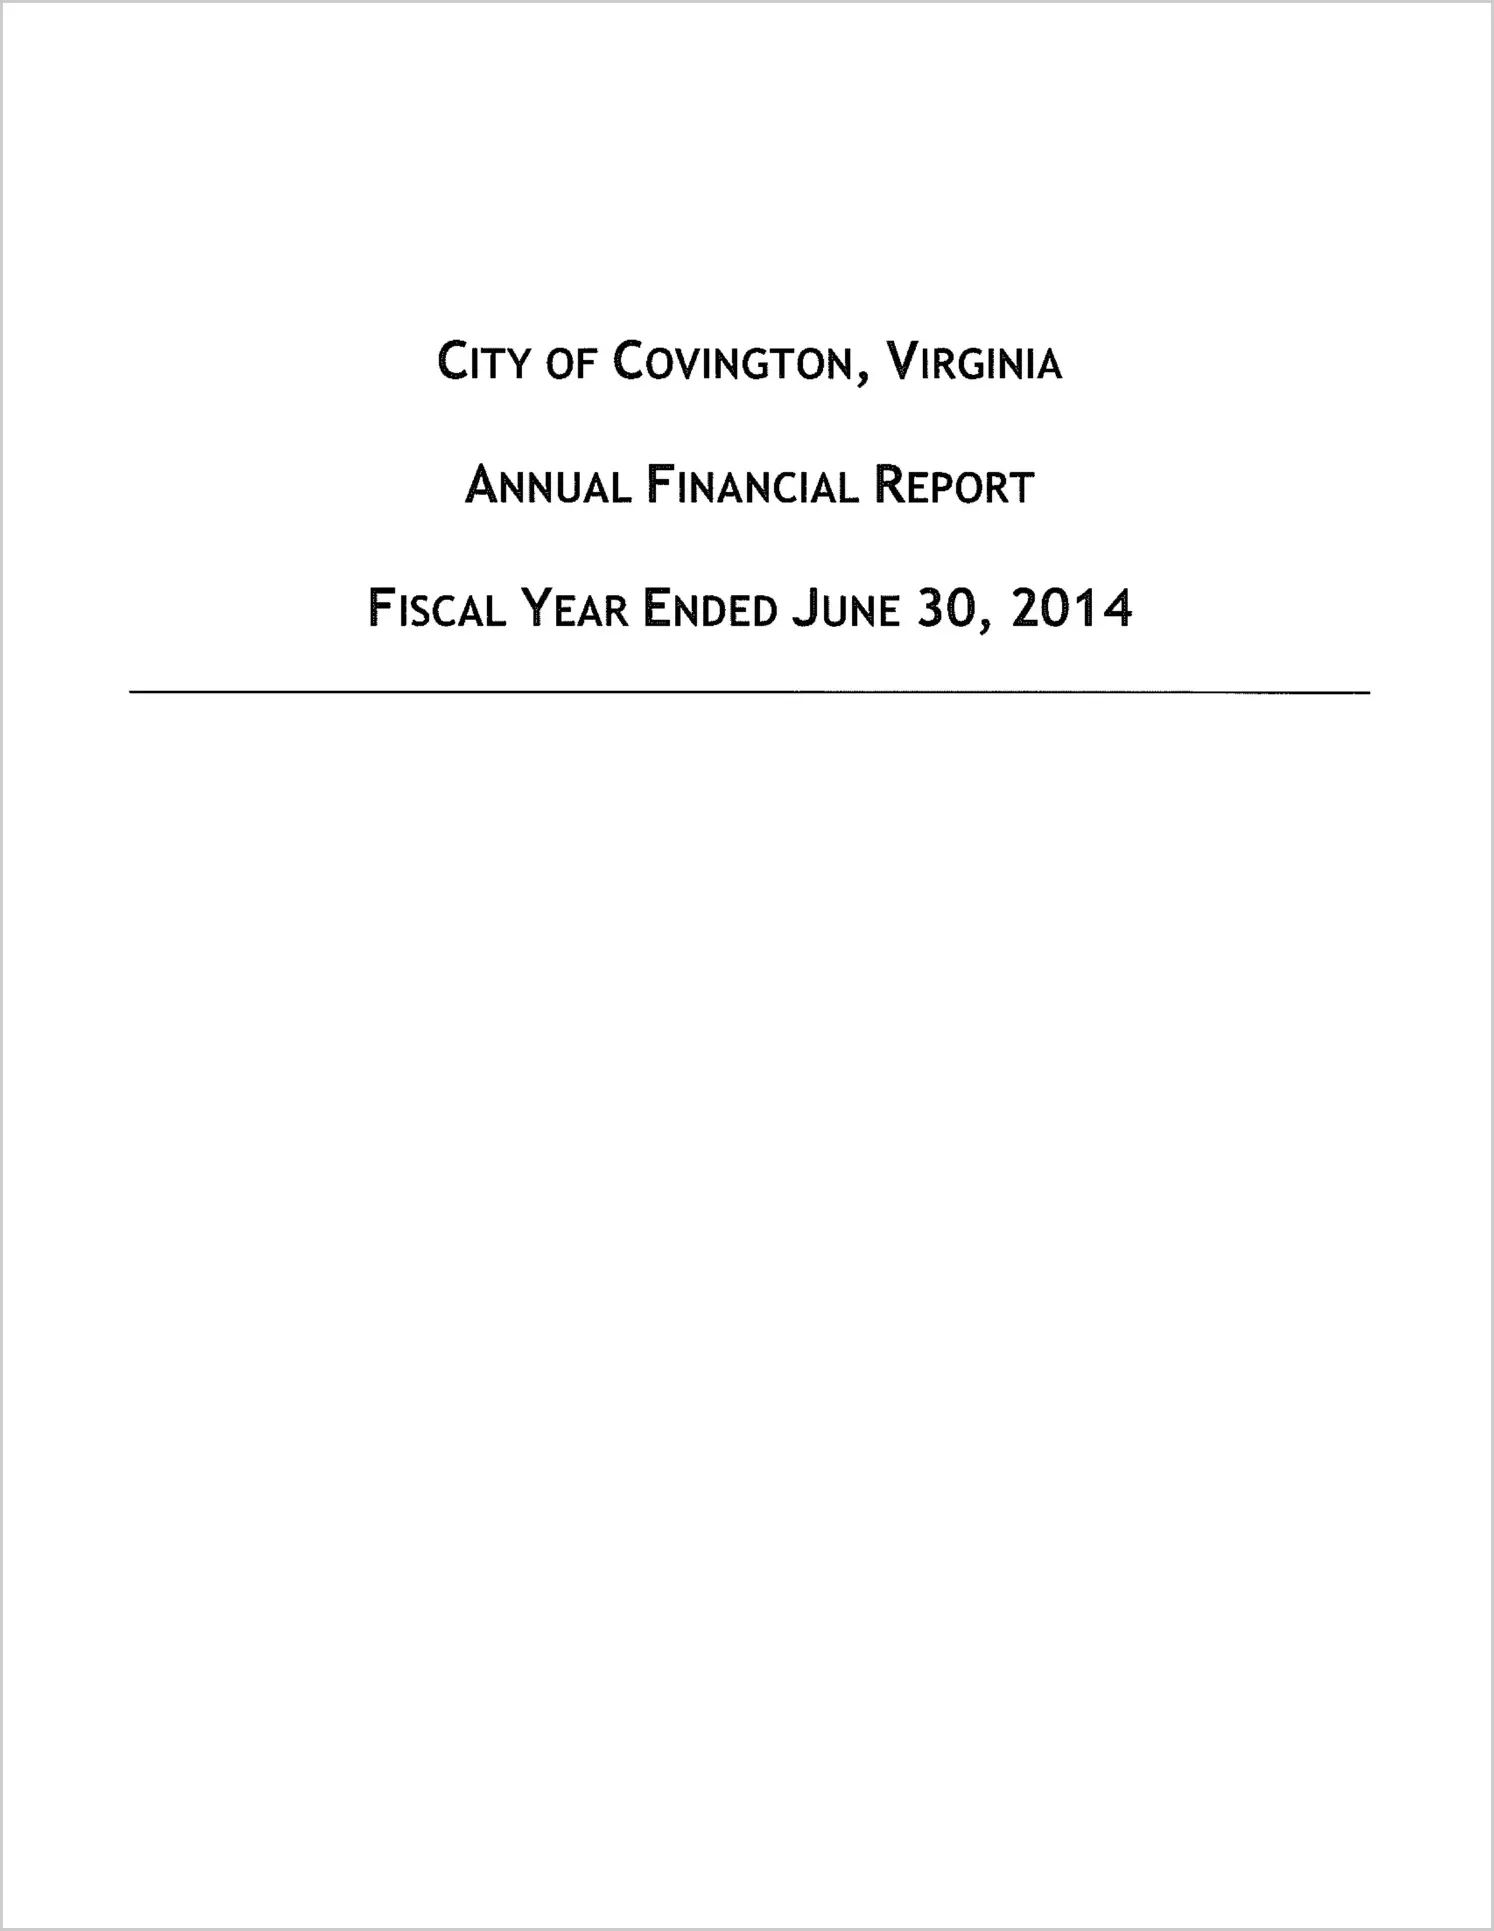 2014 Annual Financial Report for City of Covington